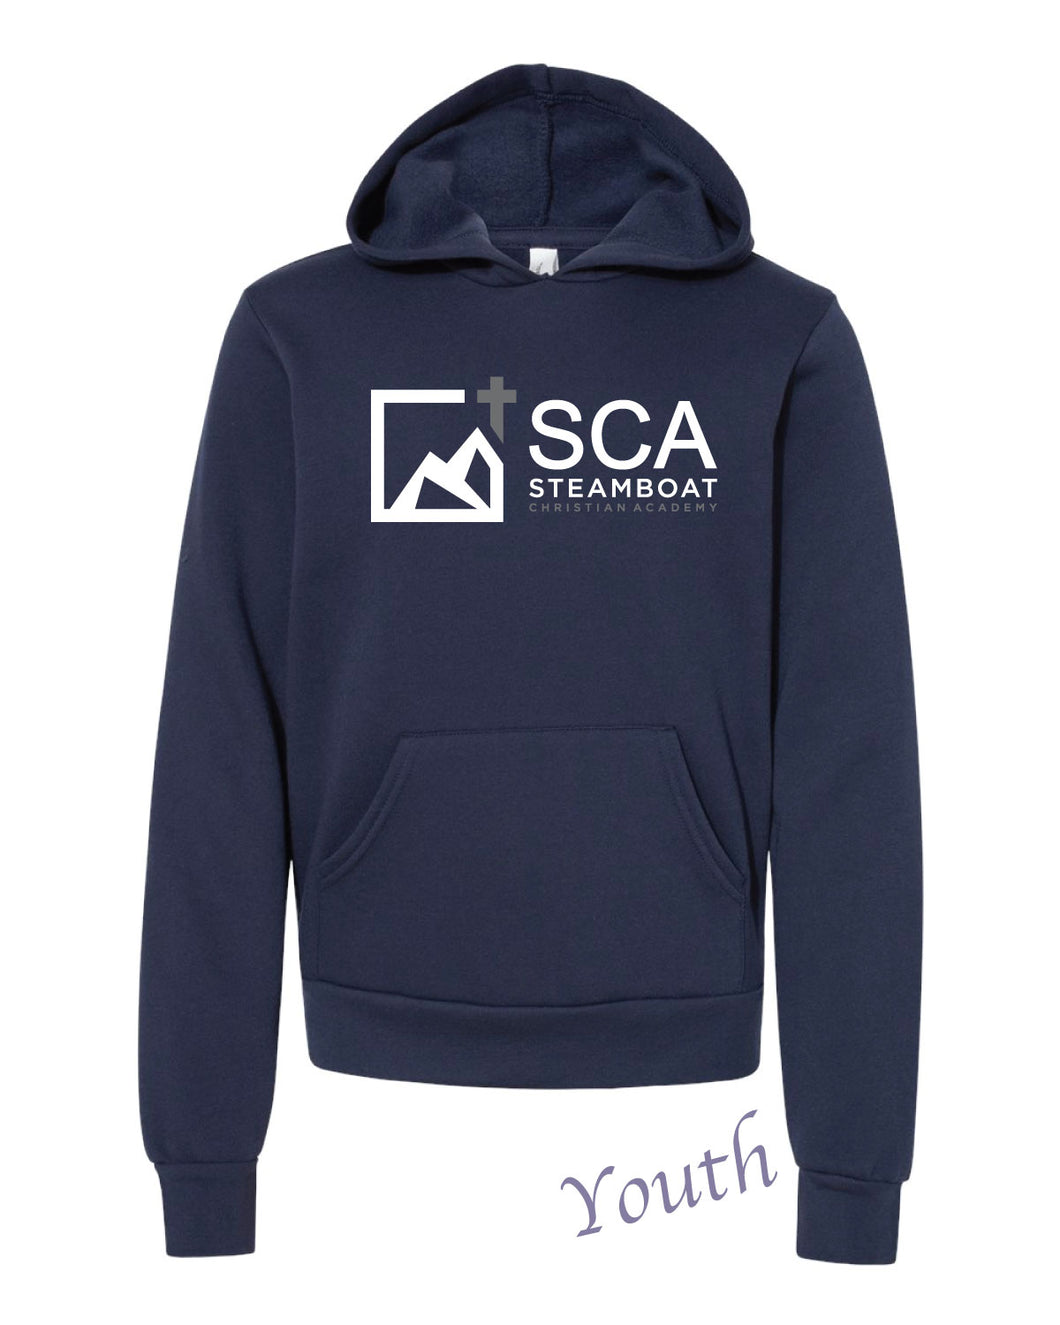 SCA Youth Hoodie